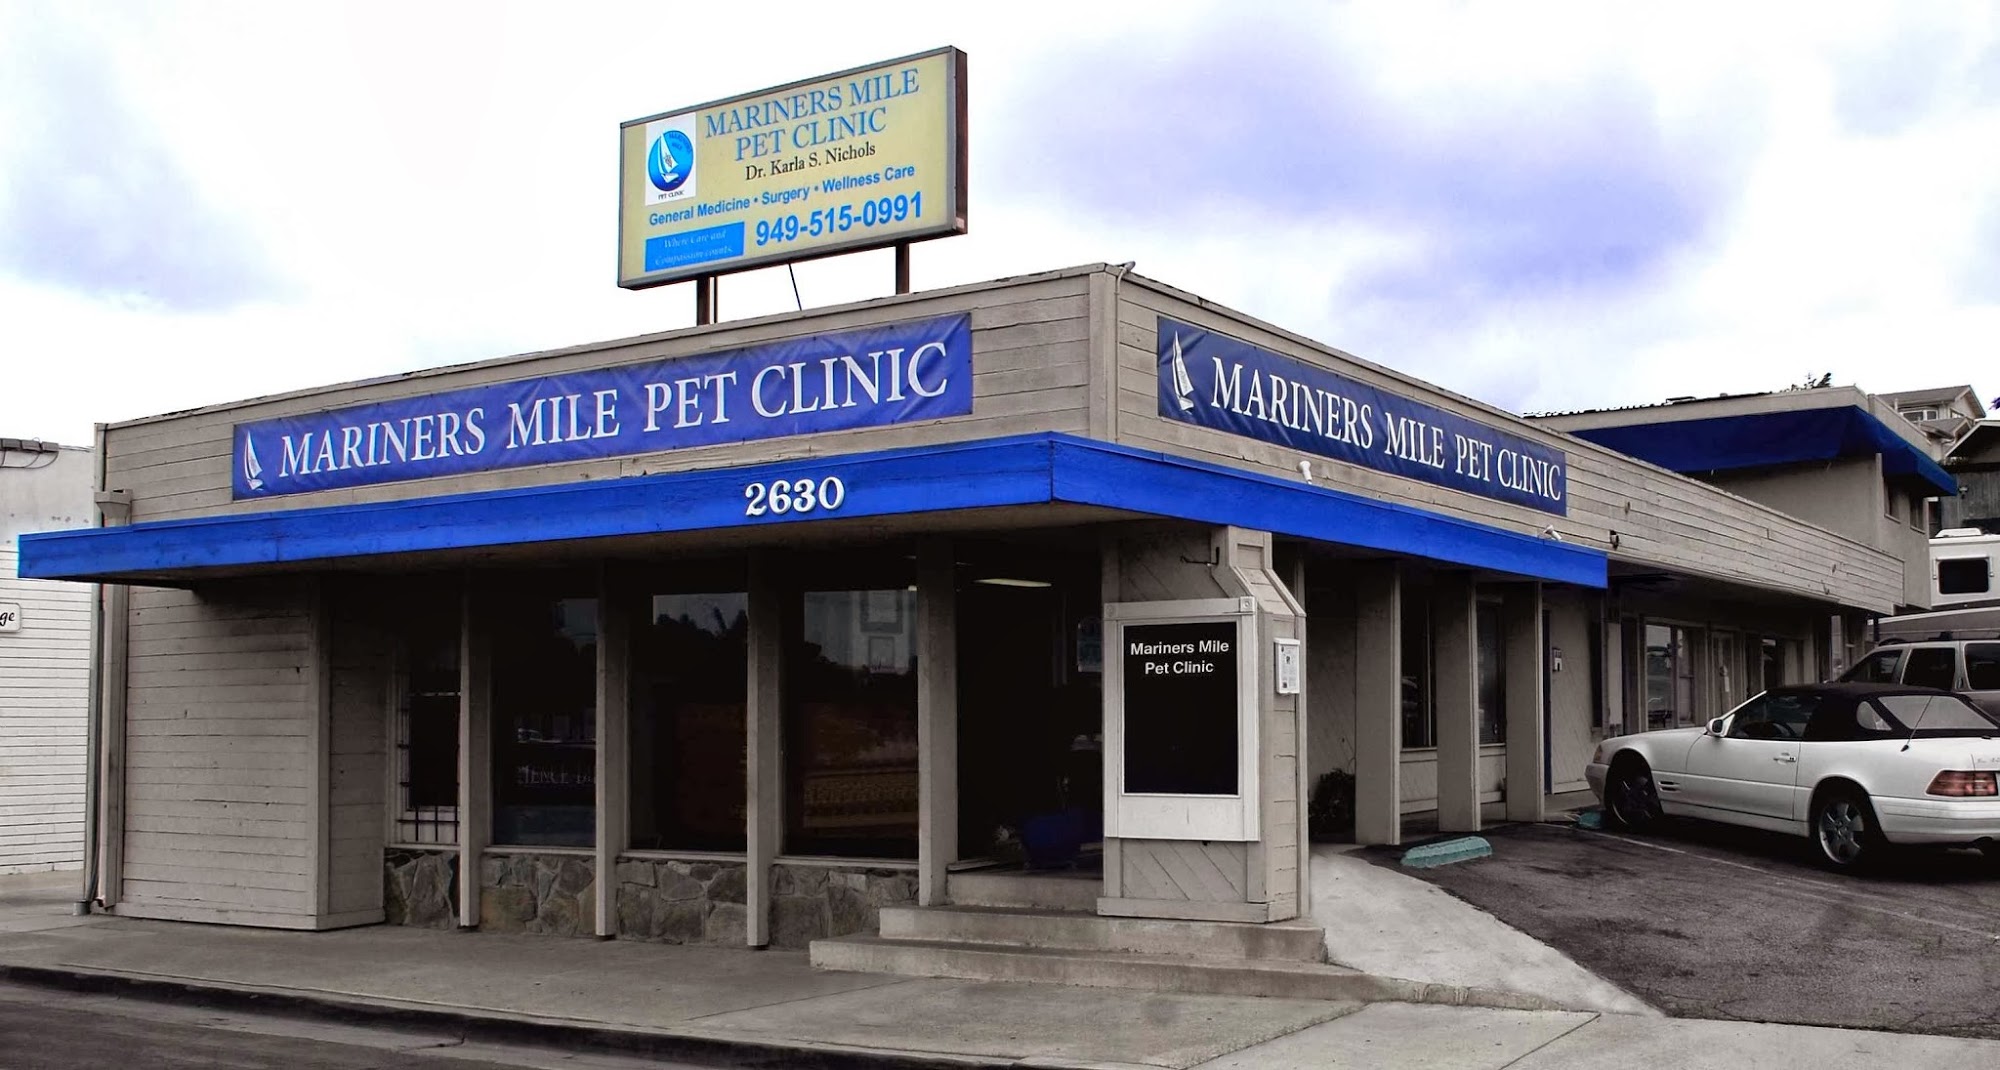 Mariners Mile Pet Clinic